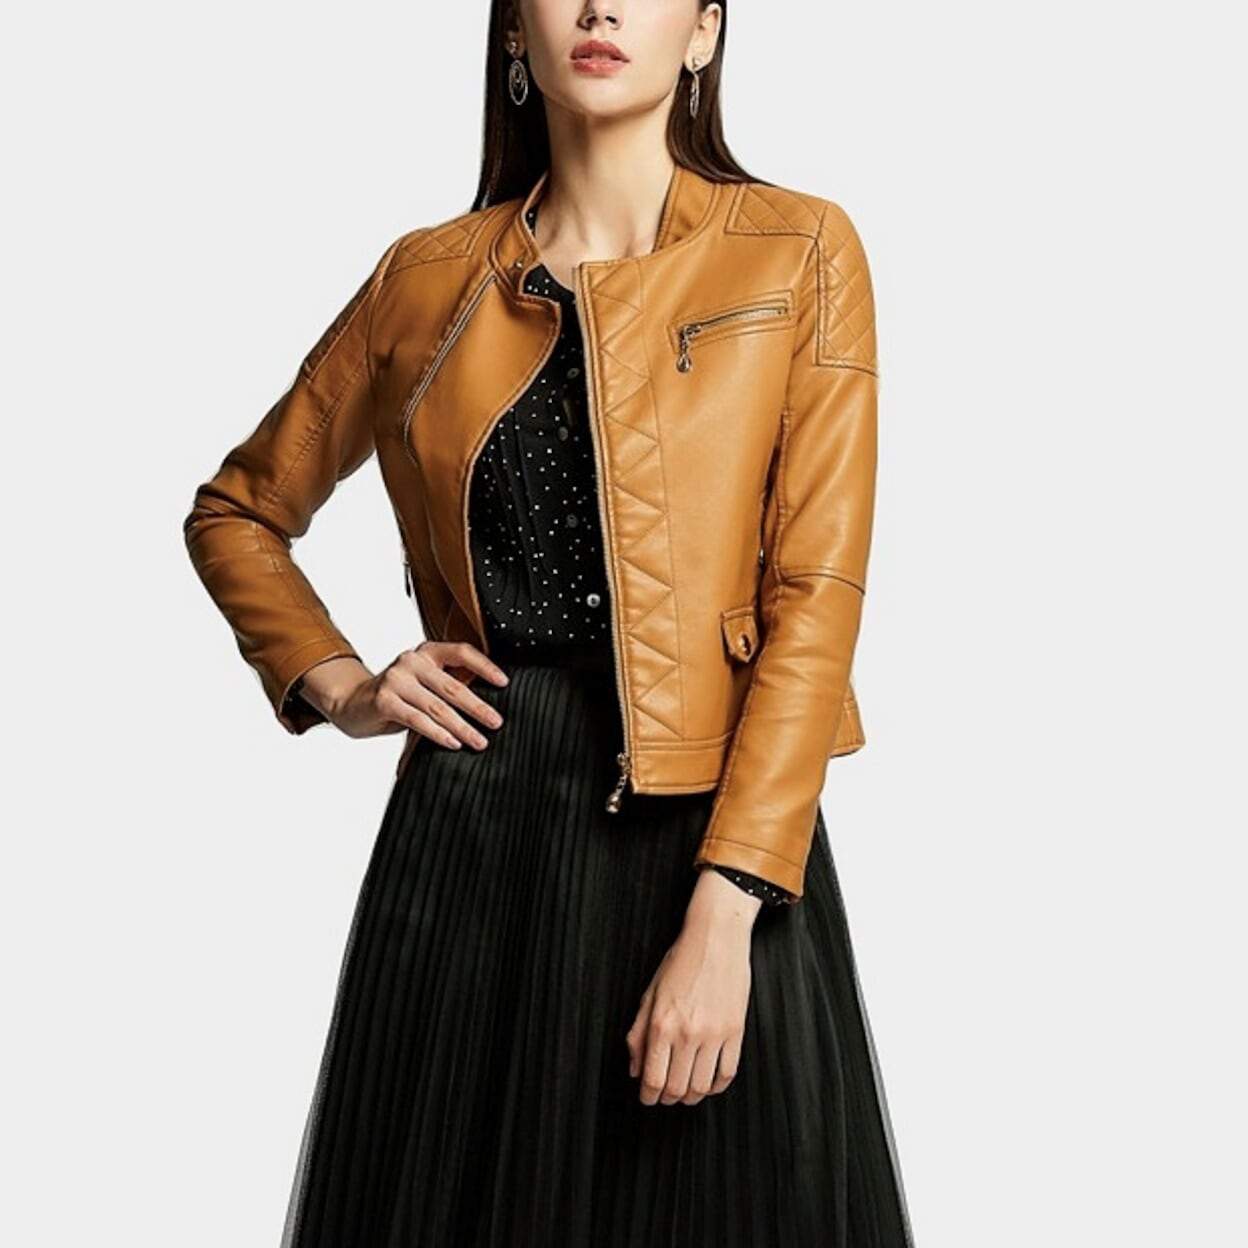 Womens Faux Leather Biker Jacket with Stiching